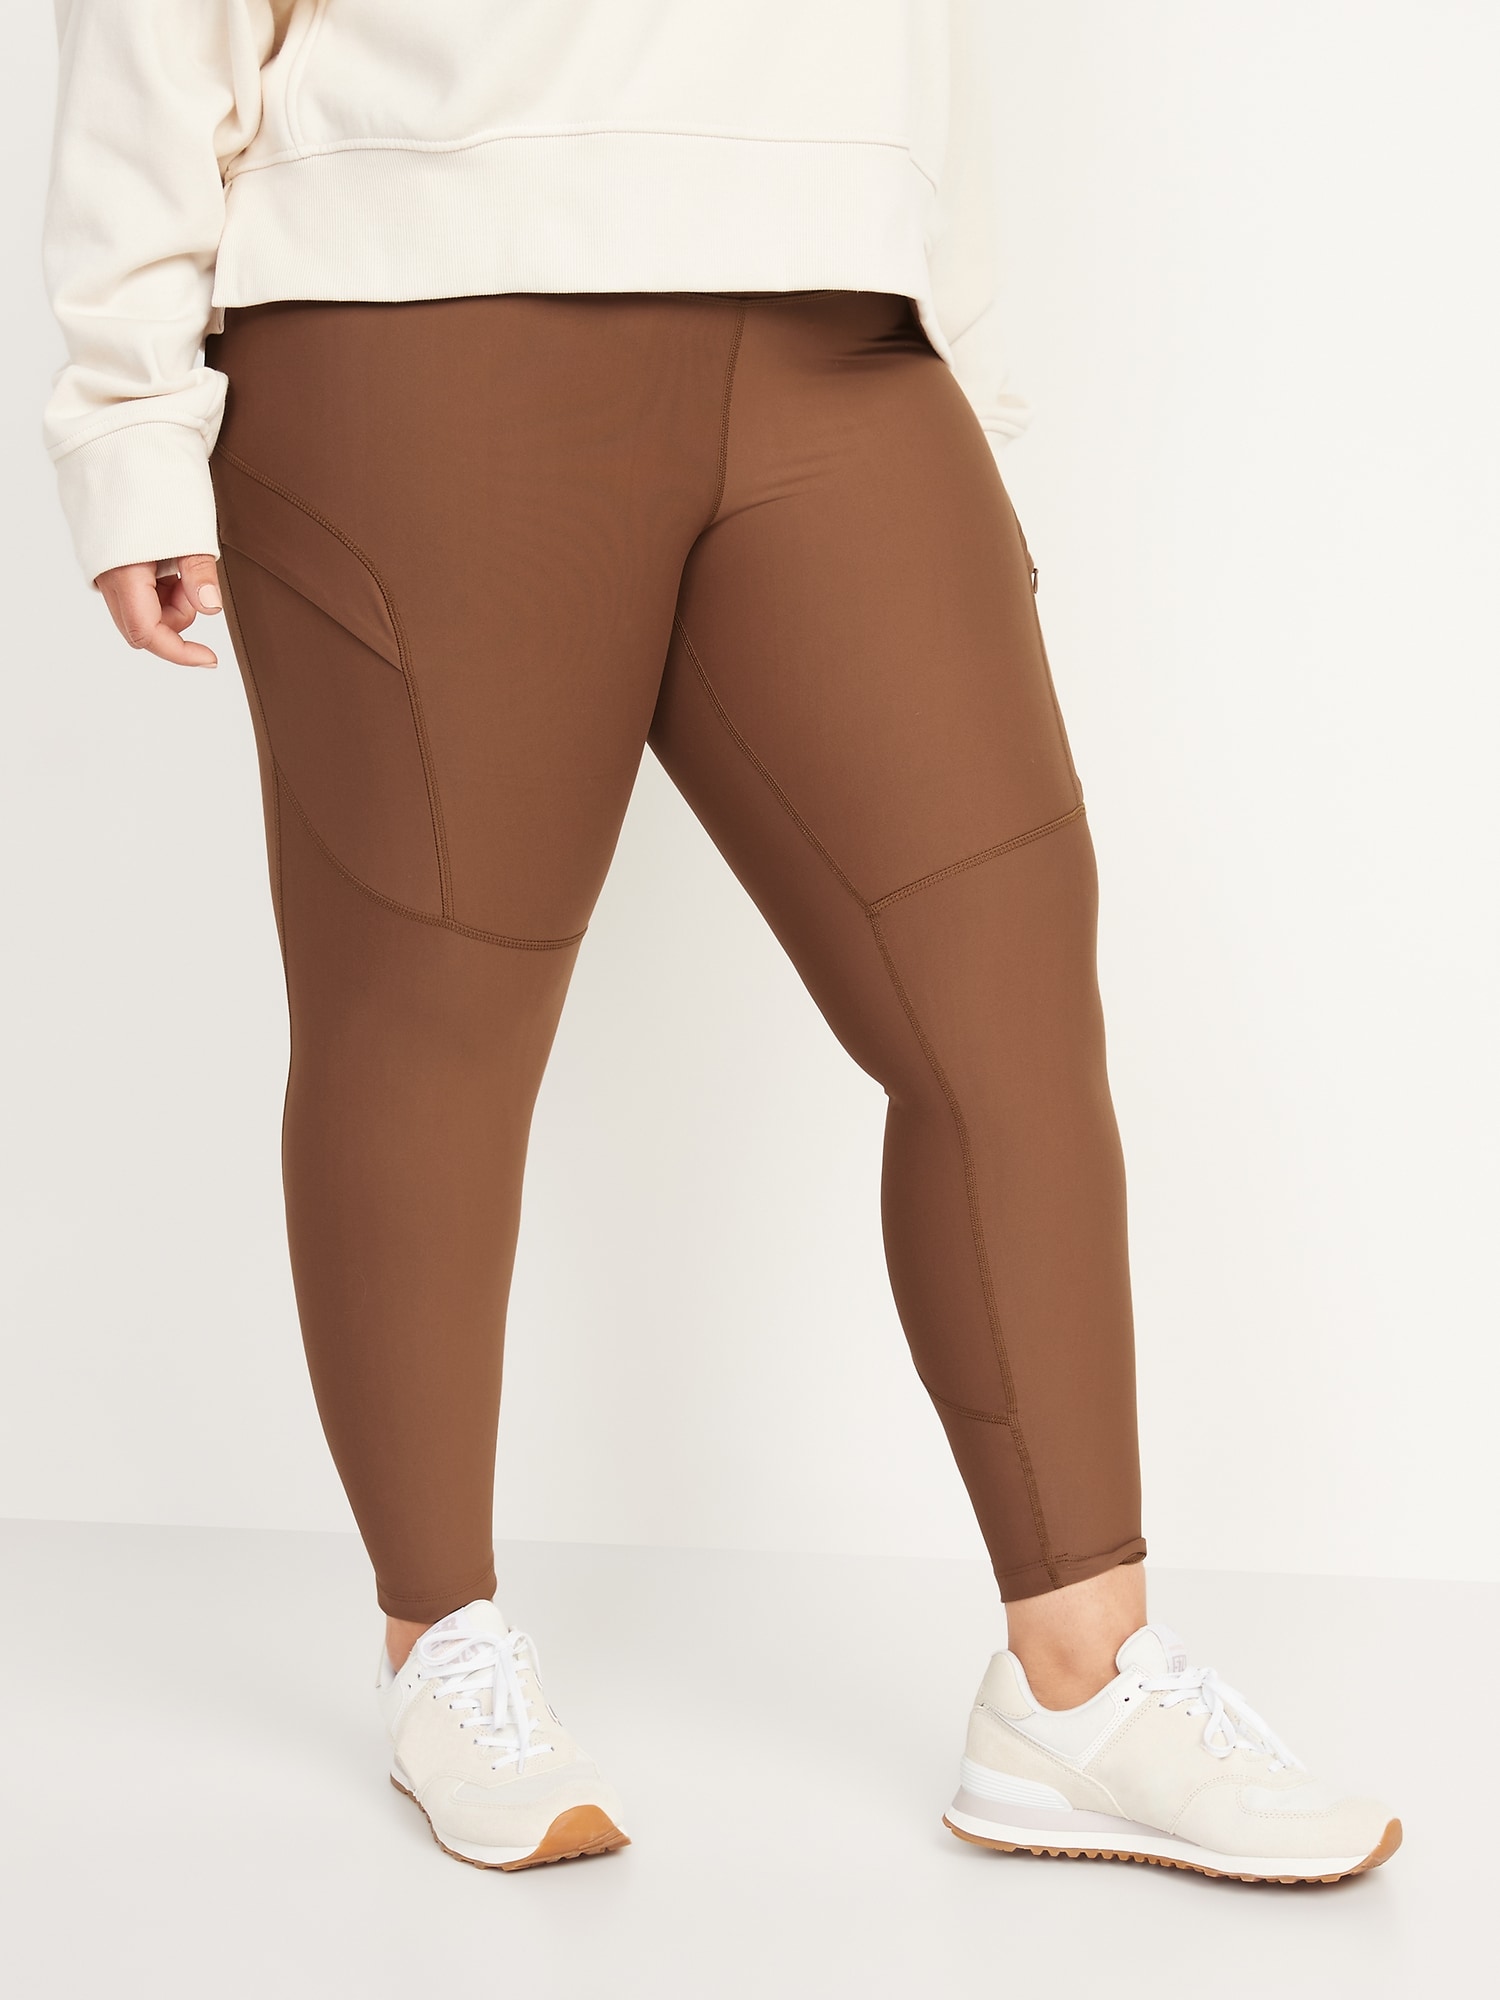 High-Waisted PowerSoft 7/8 Cargo Leggings, Old Navy